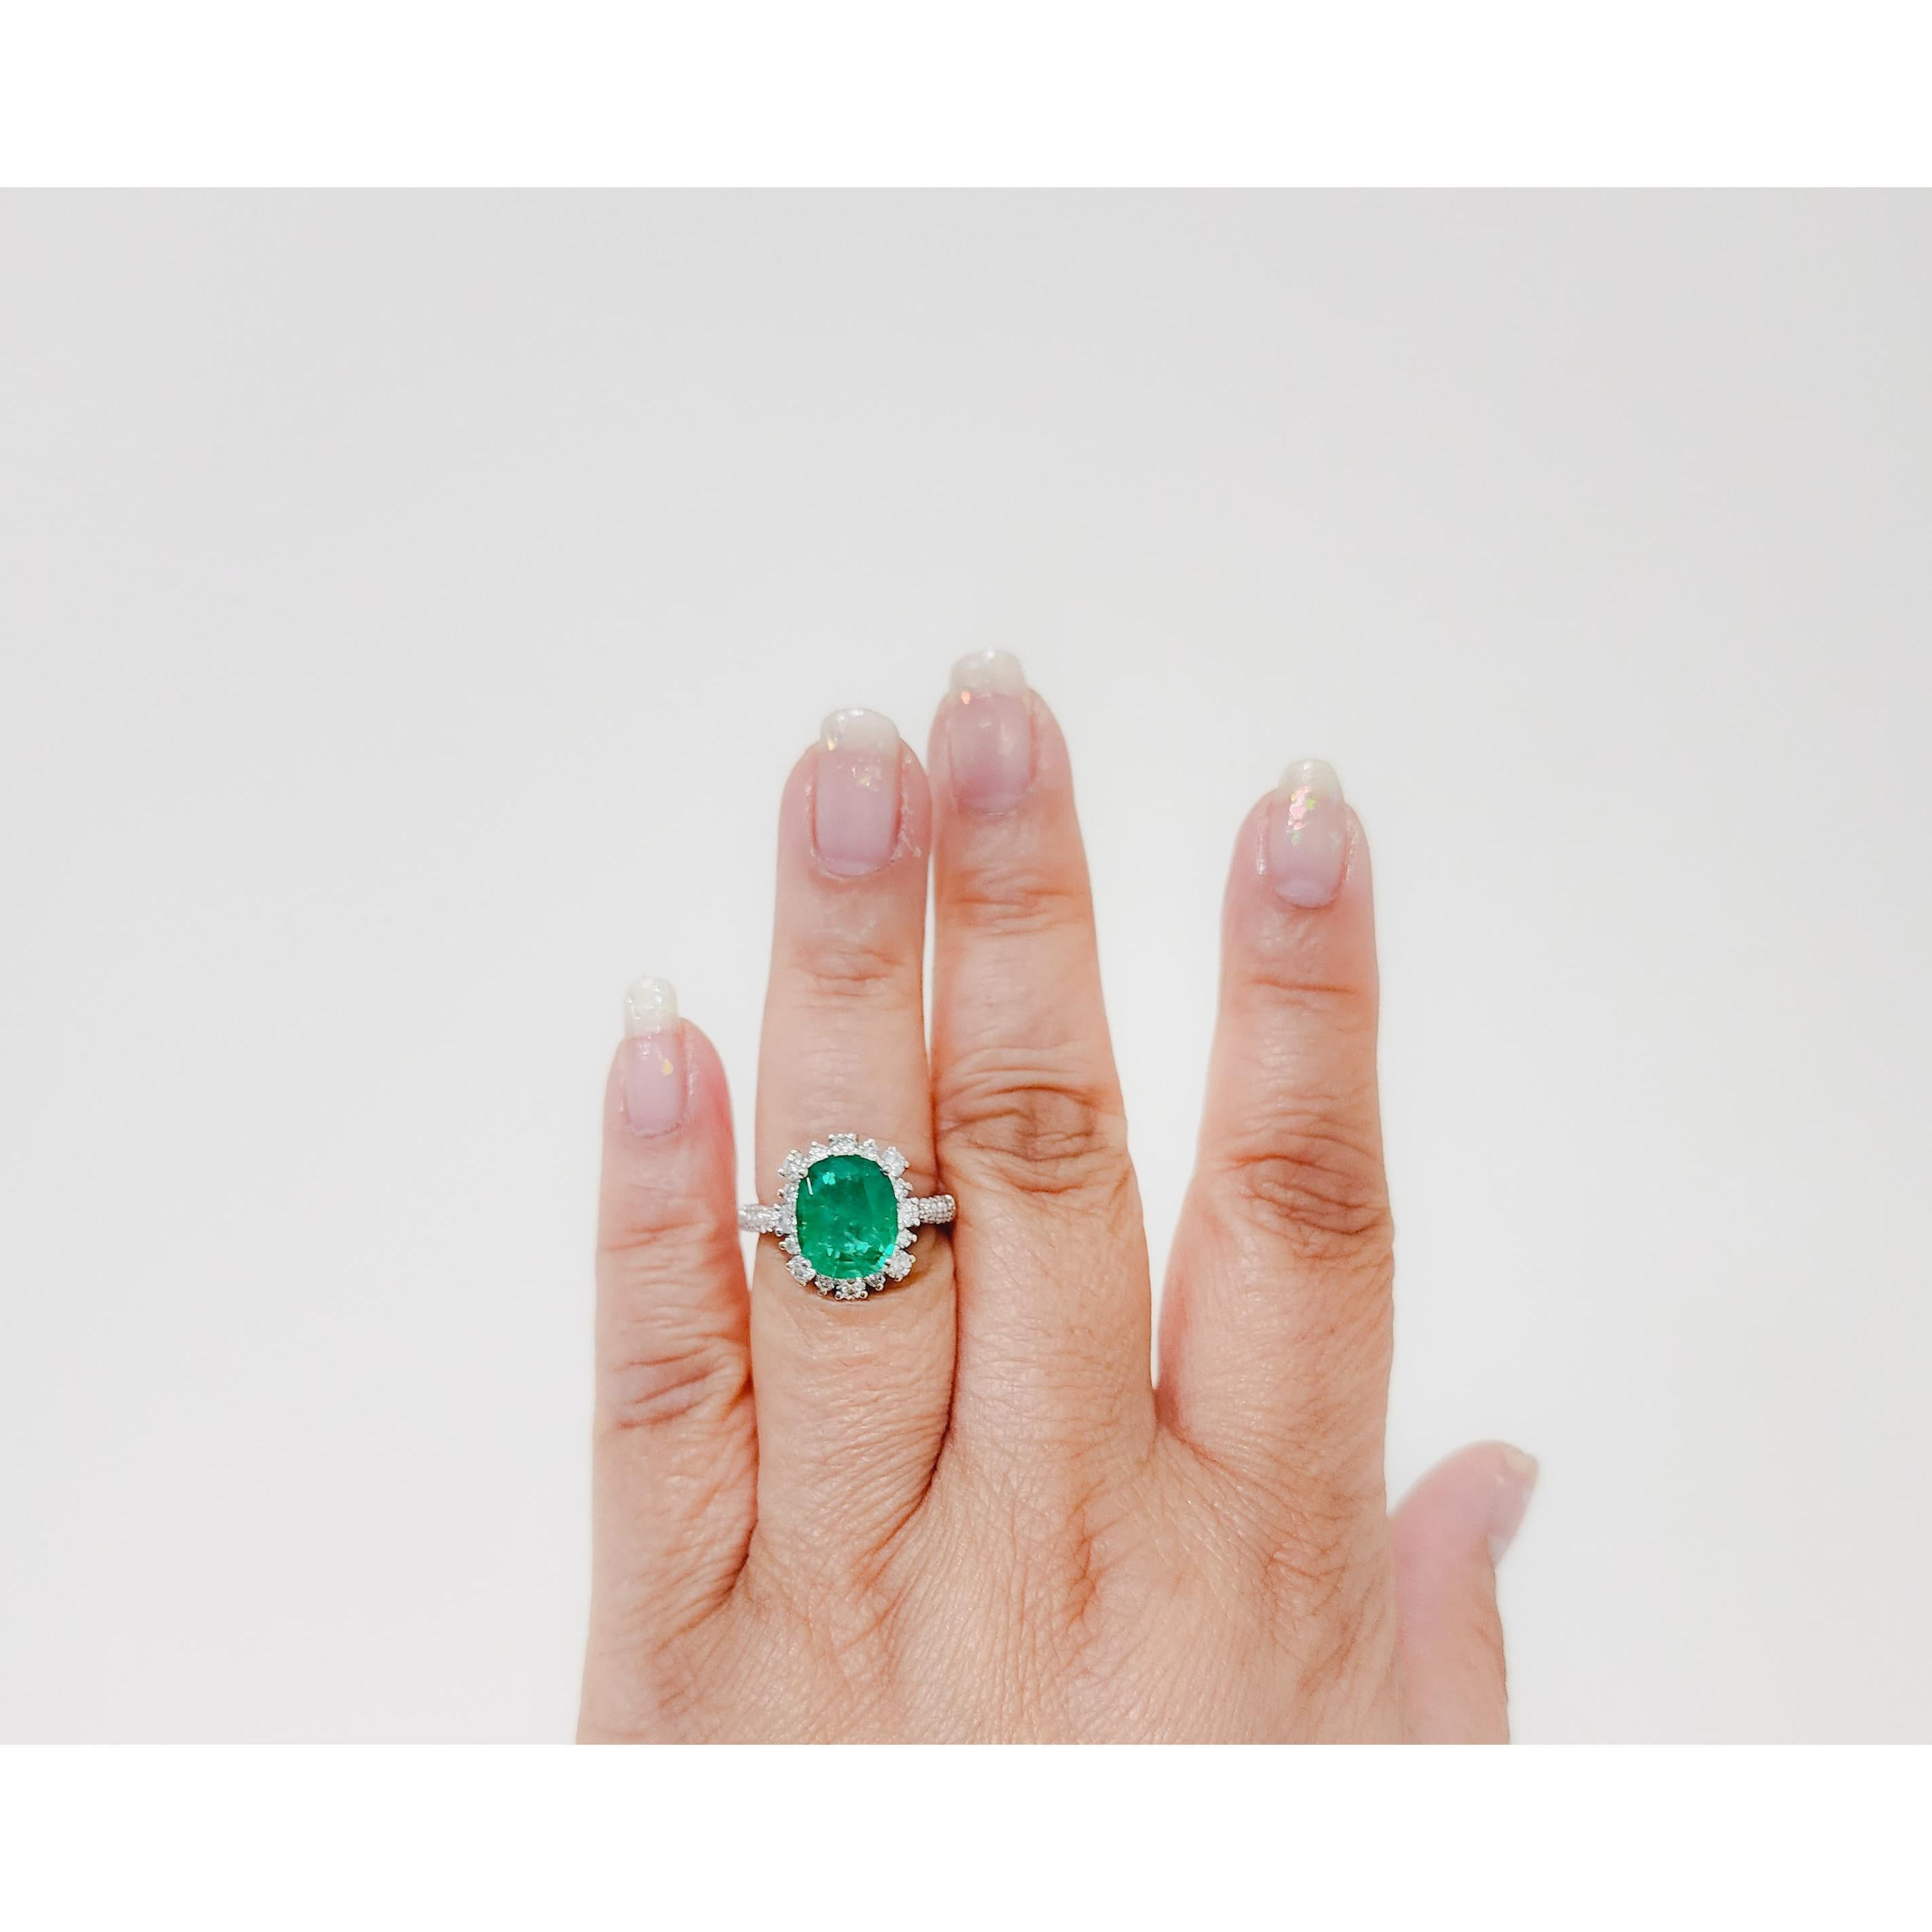 Beautiful 3.66 ct. emerald oval with good quality white diamond rounds.  Handmade in 18k white gold.  Ring size 6.75.